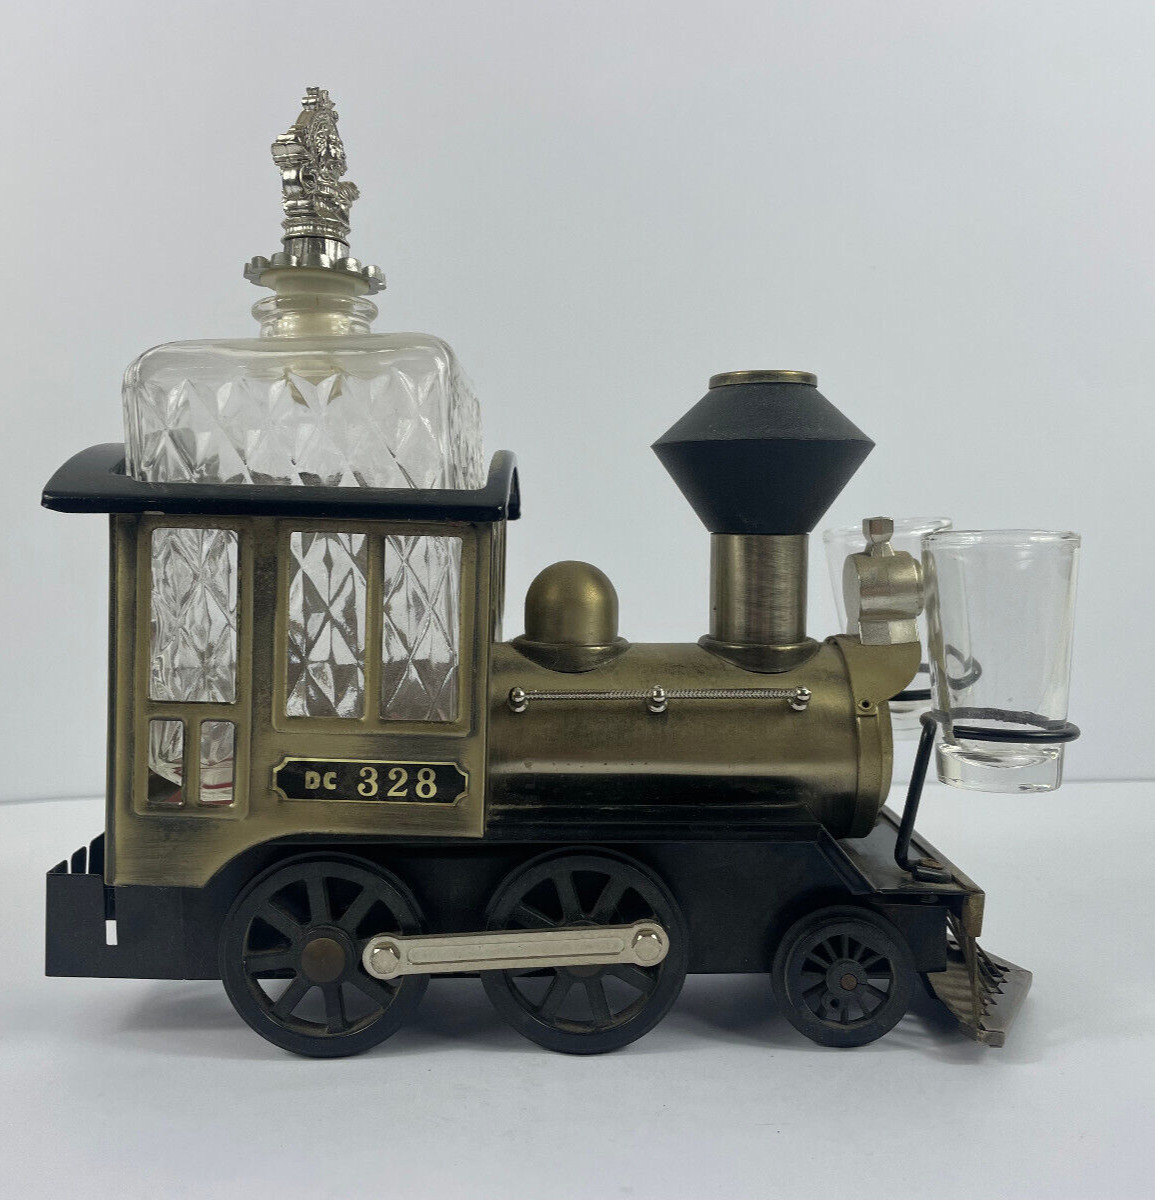 VINTAGE  Dc328 TRAIN LOCOMOTIVE MUSIC BOX DECANTER Working - Made in Japan